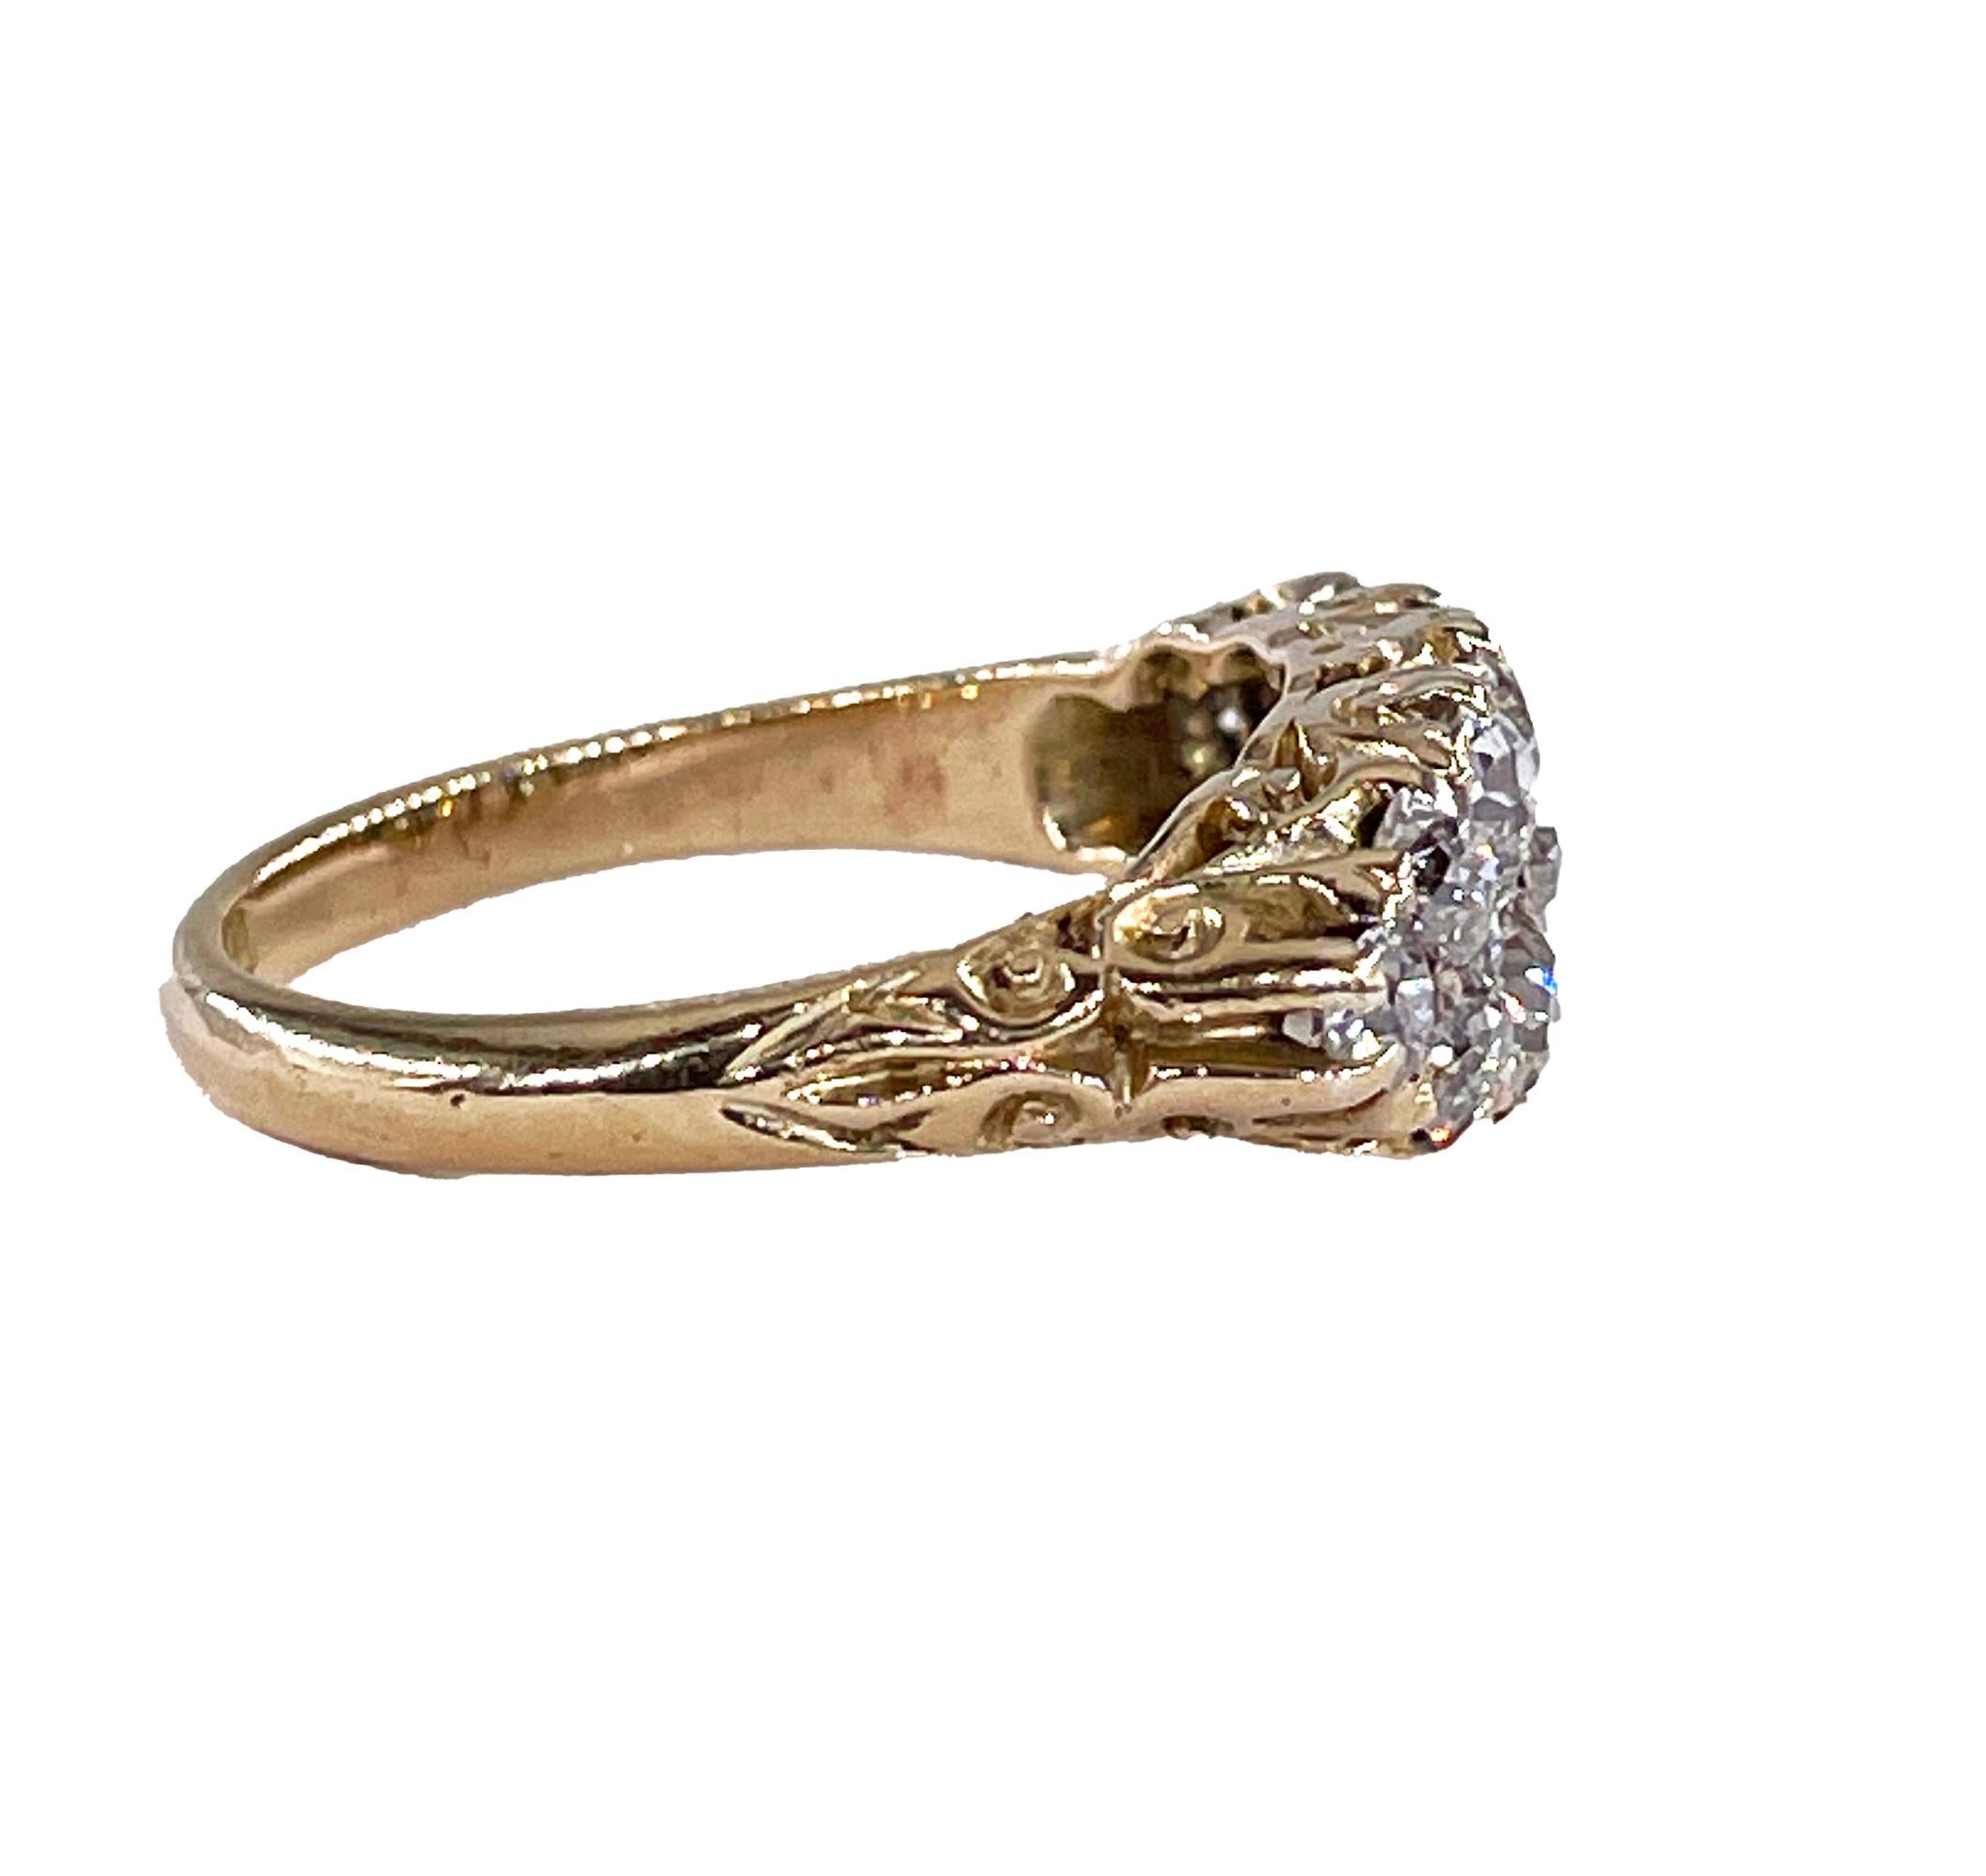 Antique 1890's Victorian 2.25ct Old Mine Diamonds 2 Rows 18K Wedding Band Ring In Good Condition For Sale In New York, NY